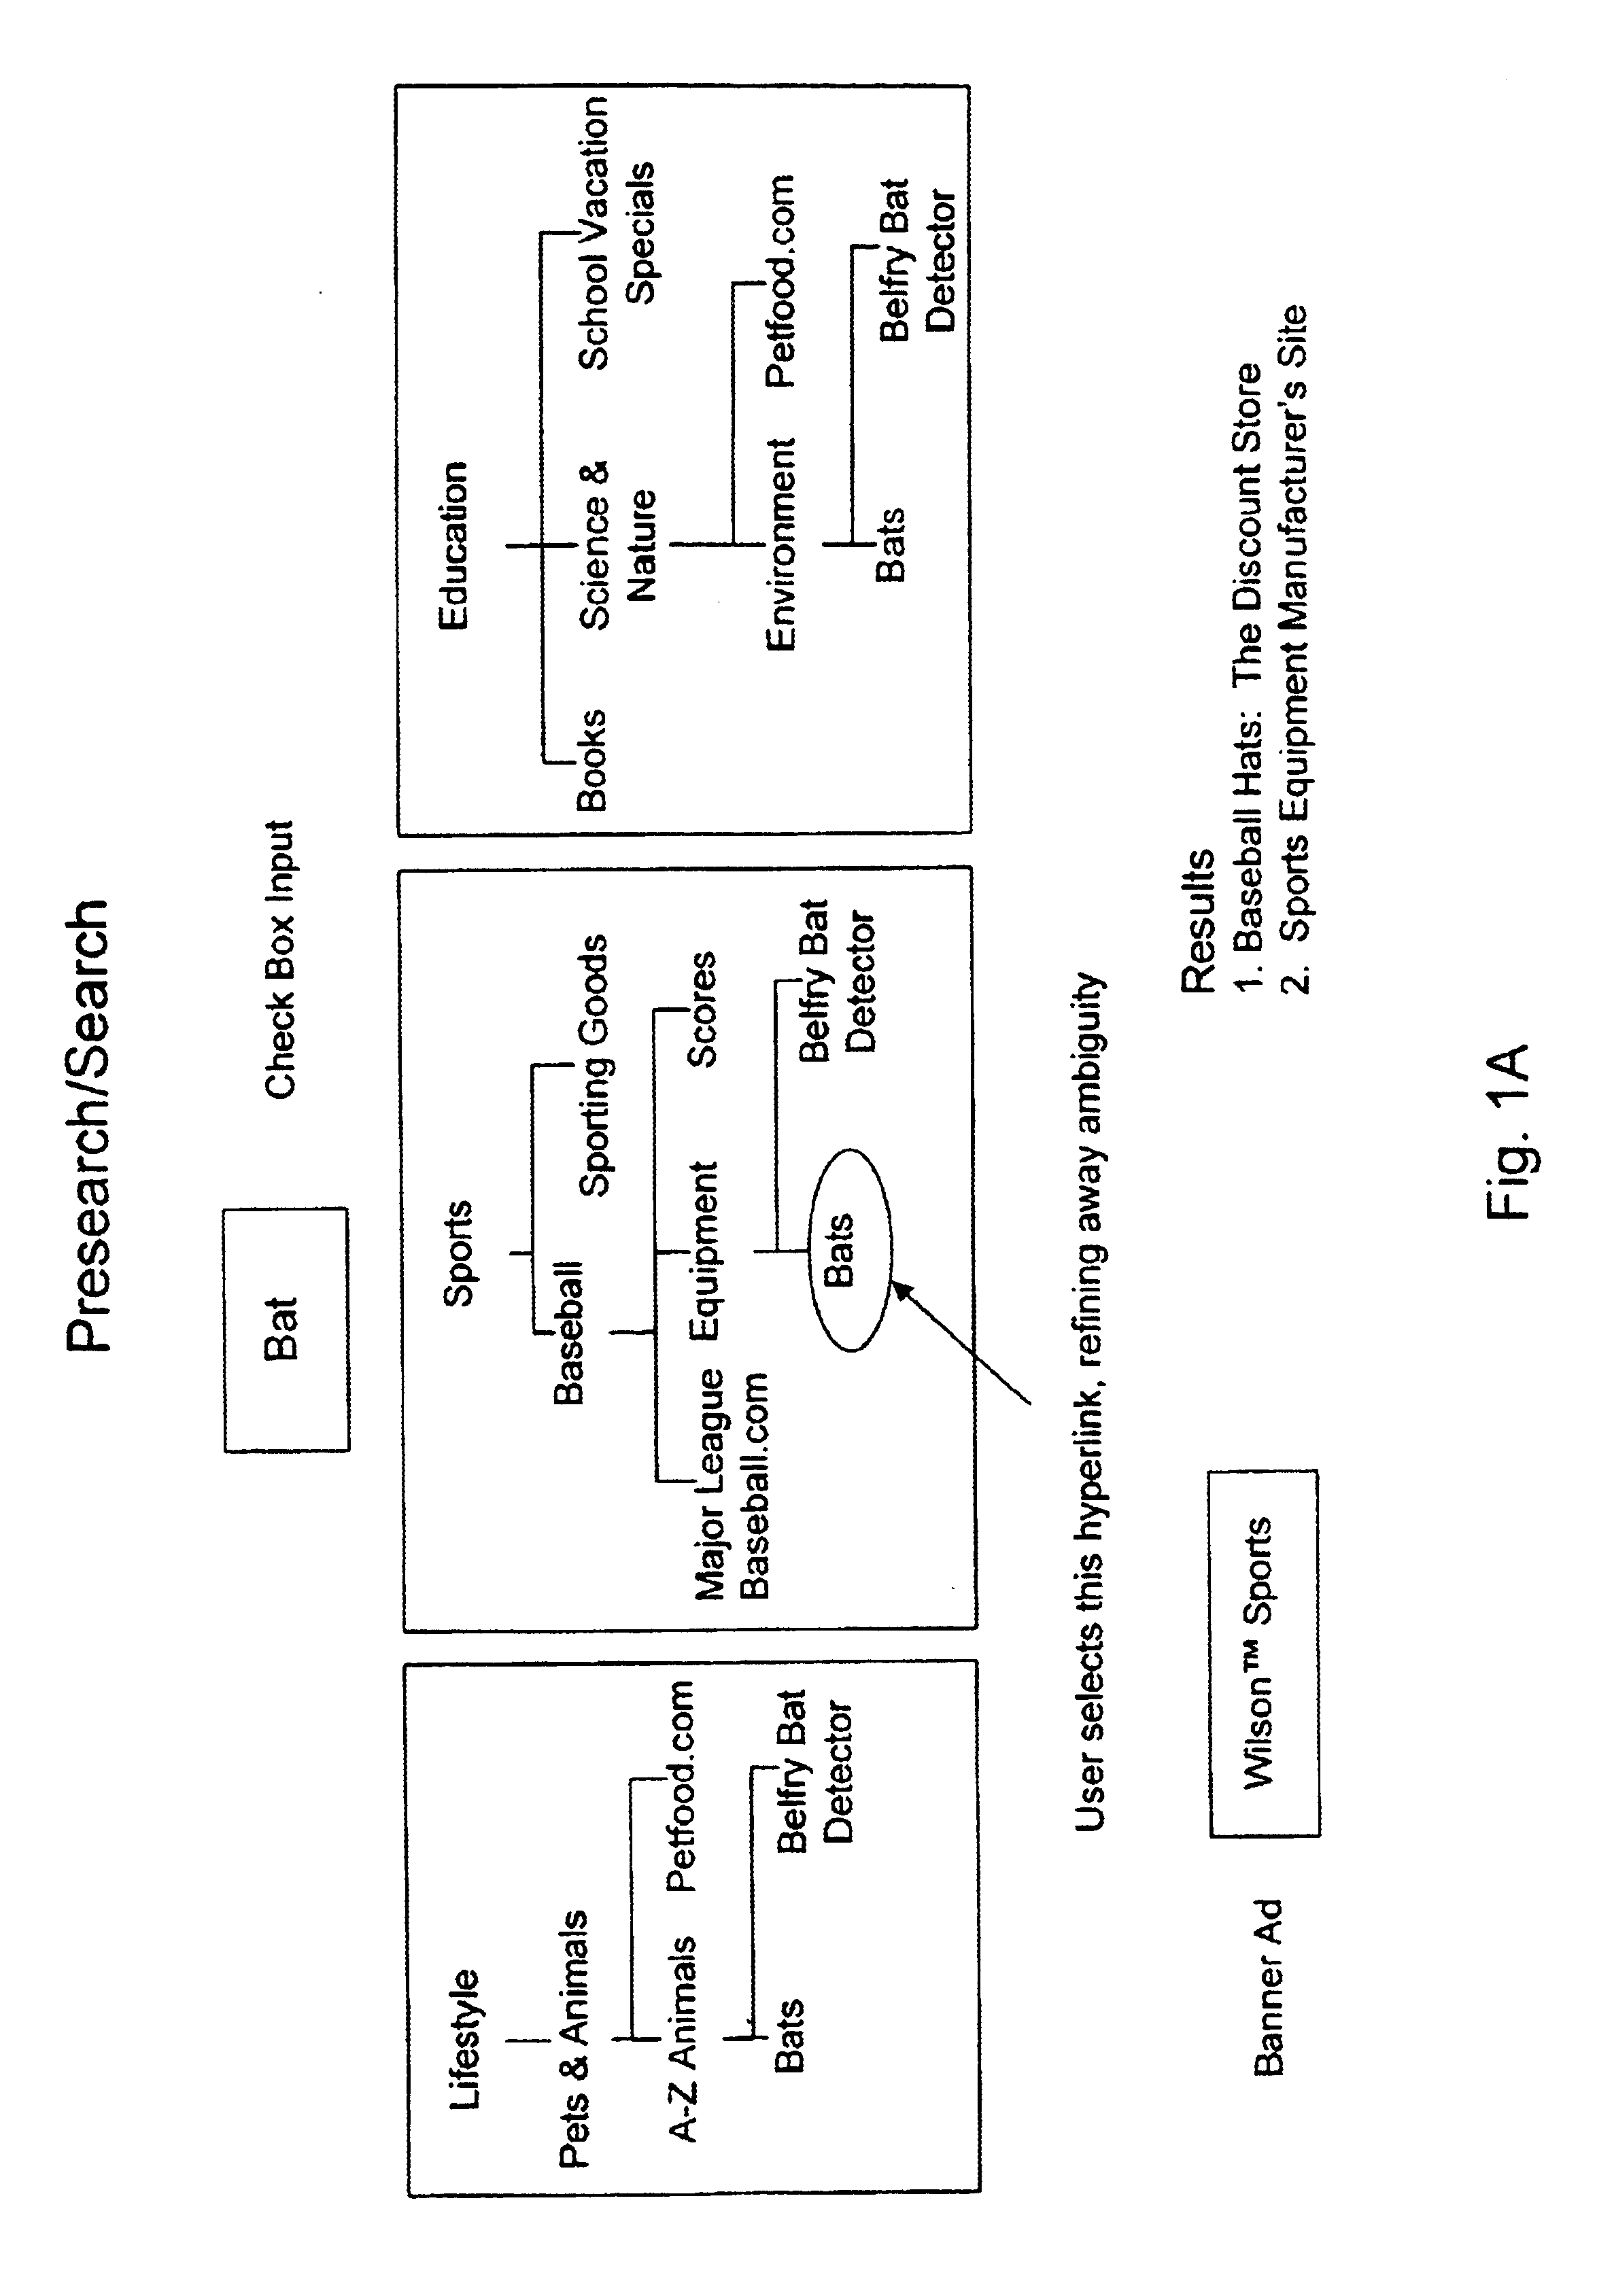 Computer graphic display visualization system and method